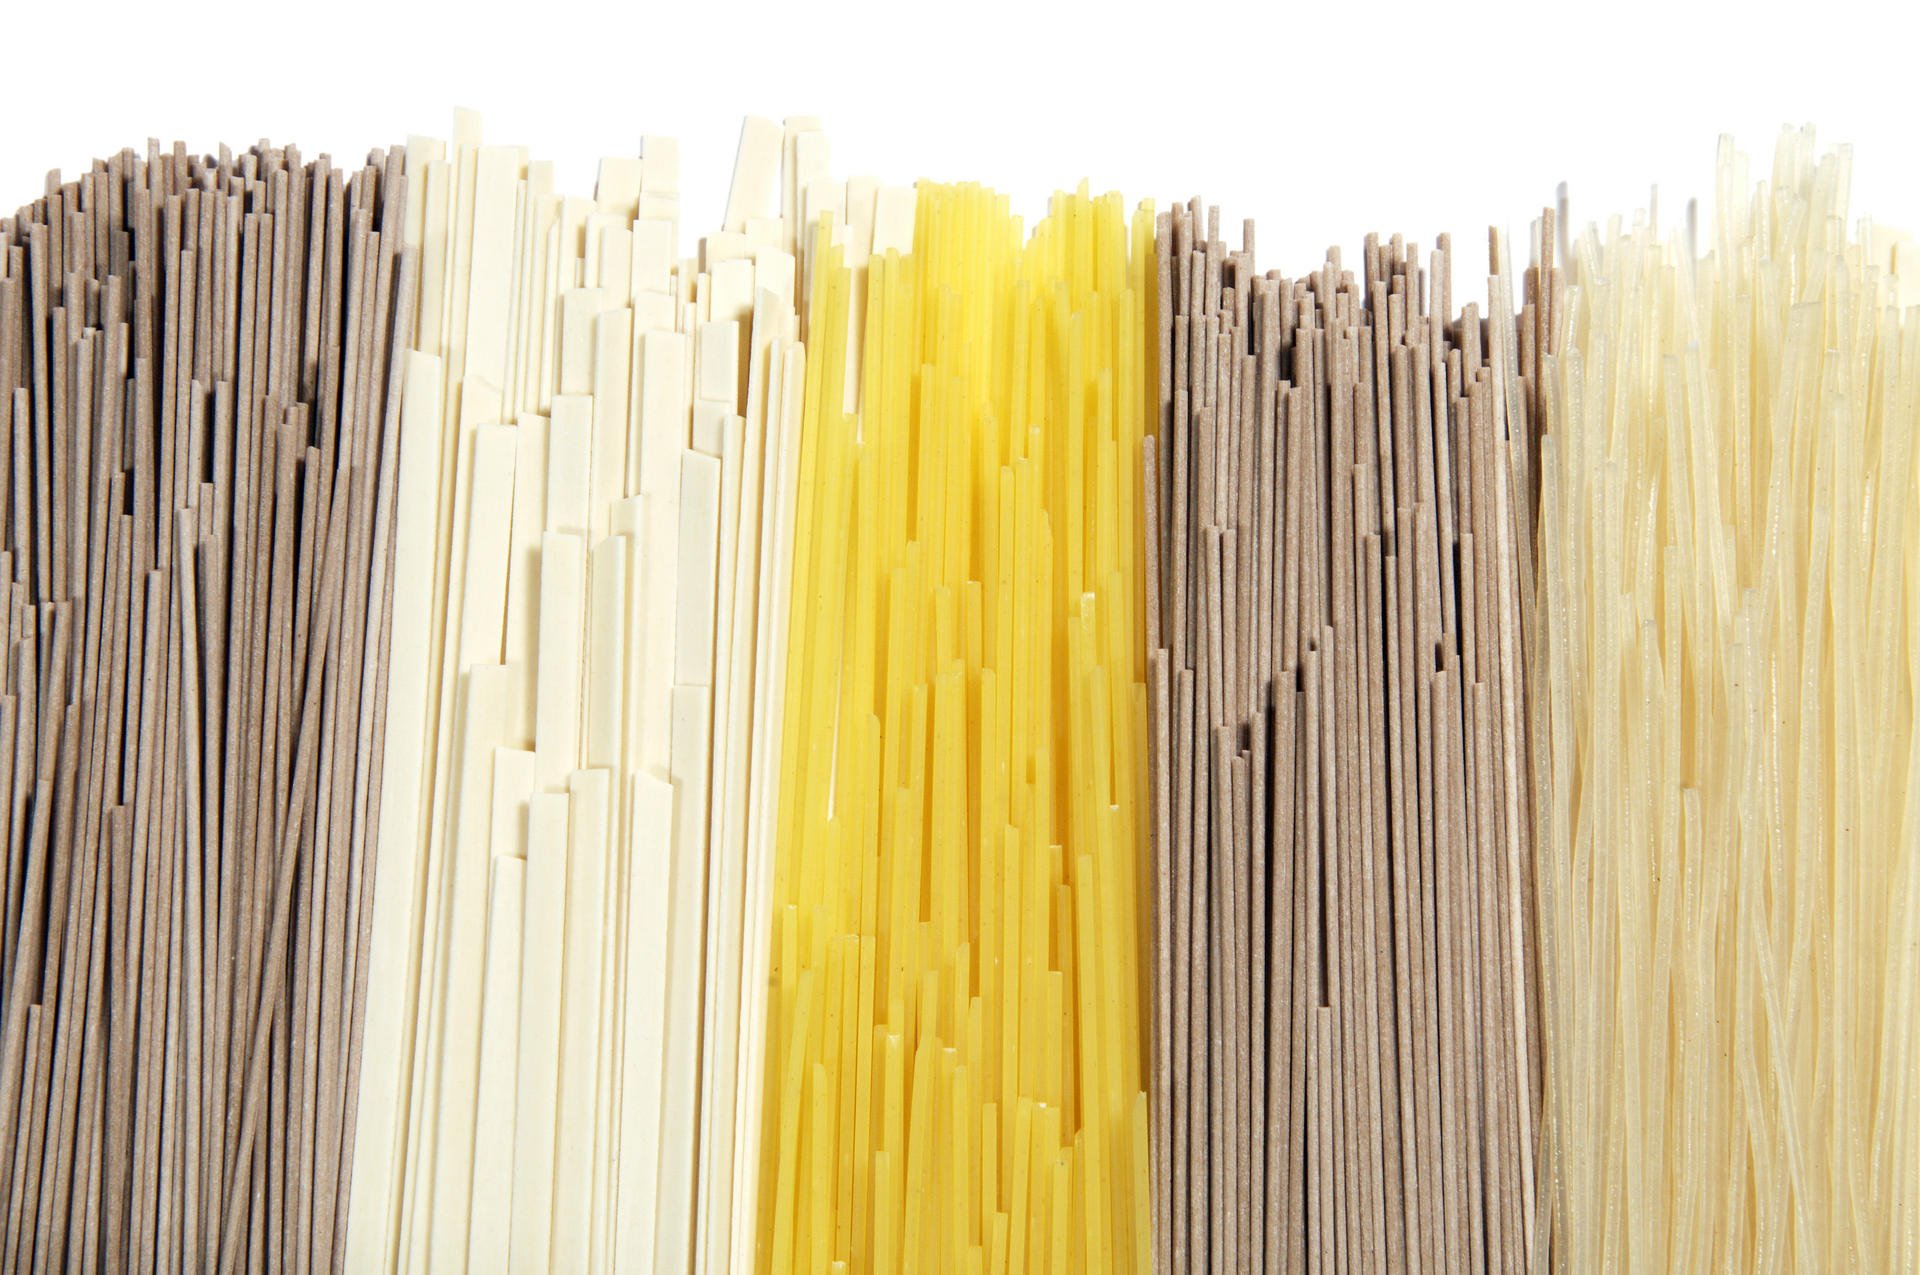 In Hong Kong, gluten-free and alternative pastas can be found on a growing number of restaurant menus and in food stores.